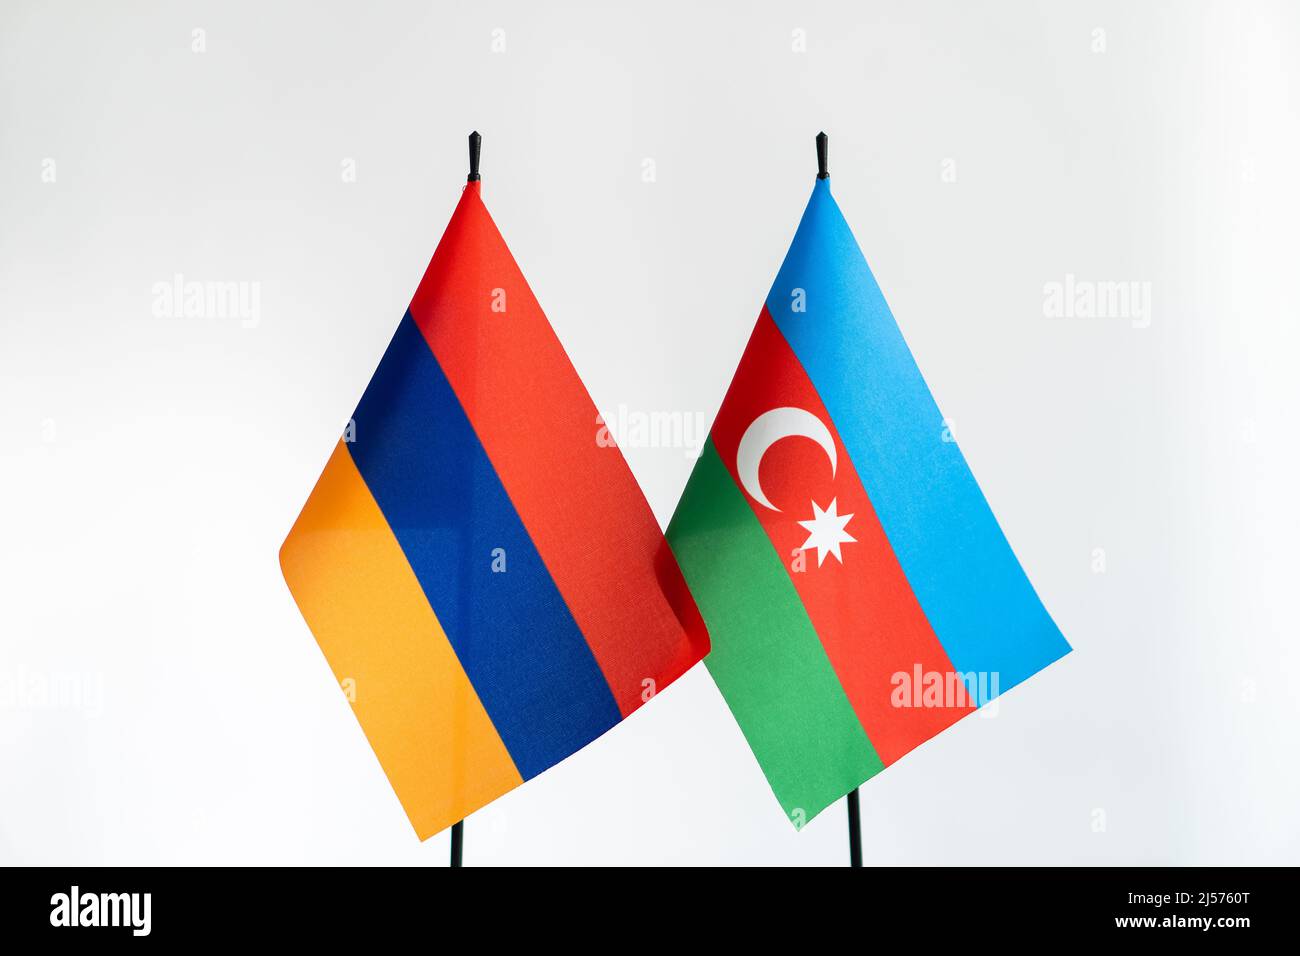 State flags of Azerbaijan and Armenia on light background. Karabakh conflict concept Stock Photo